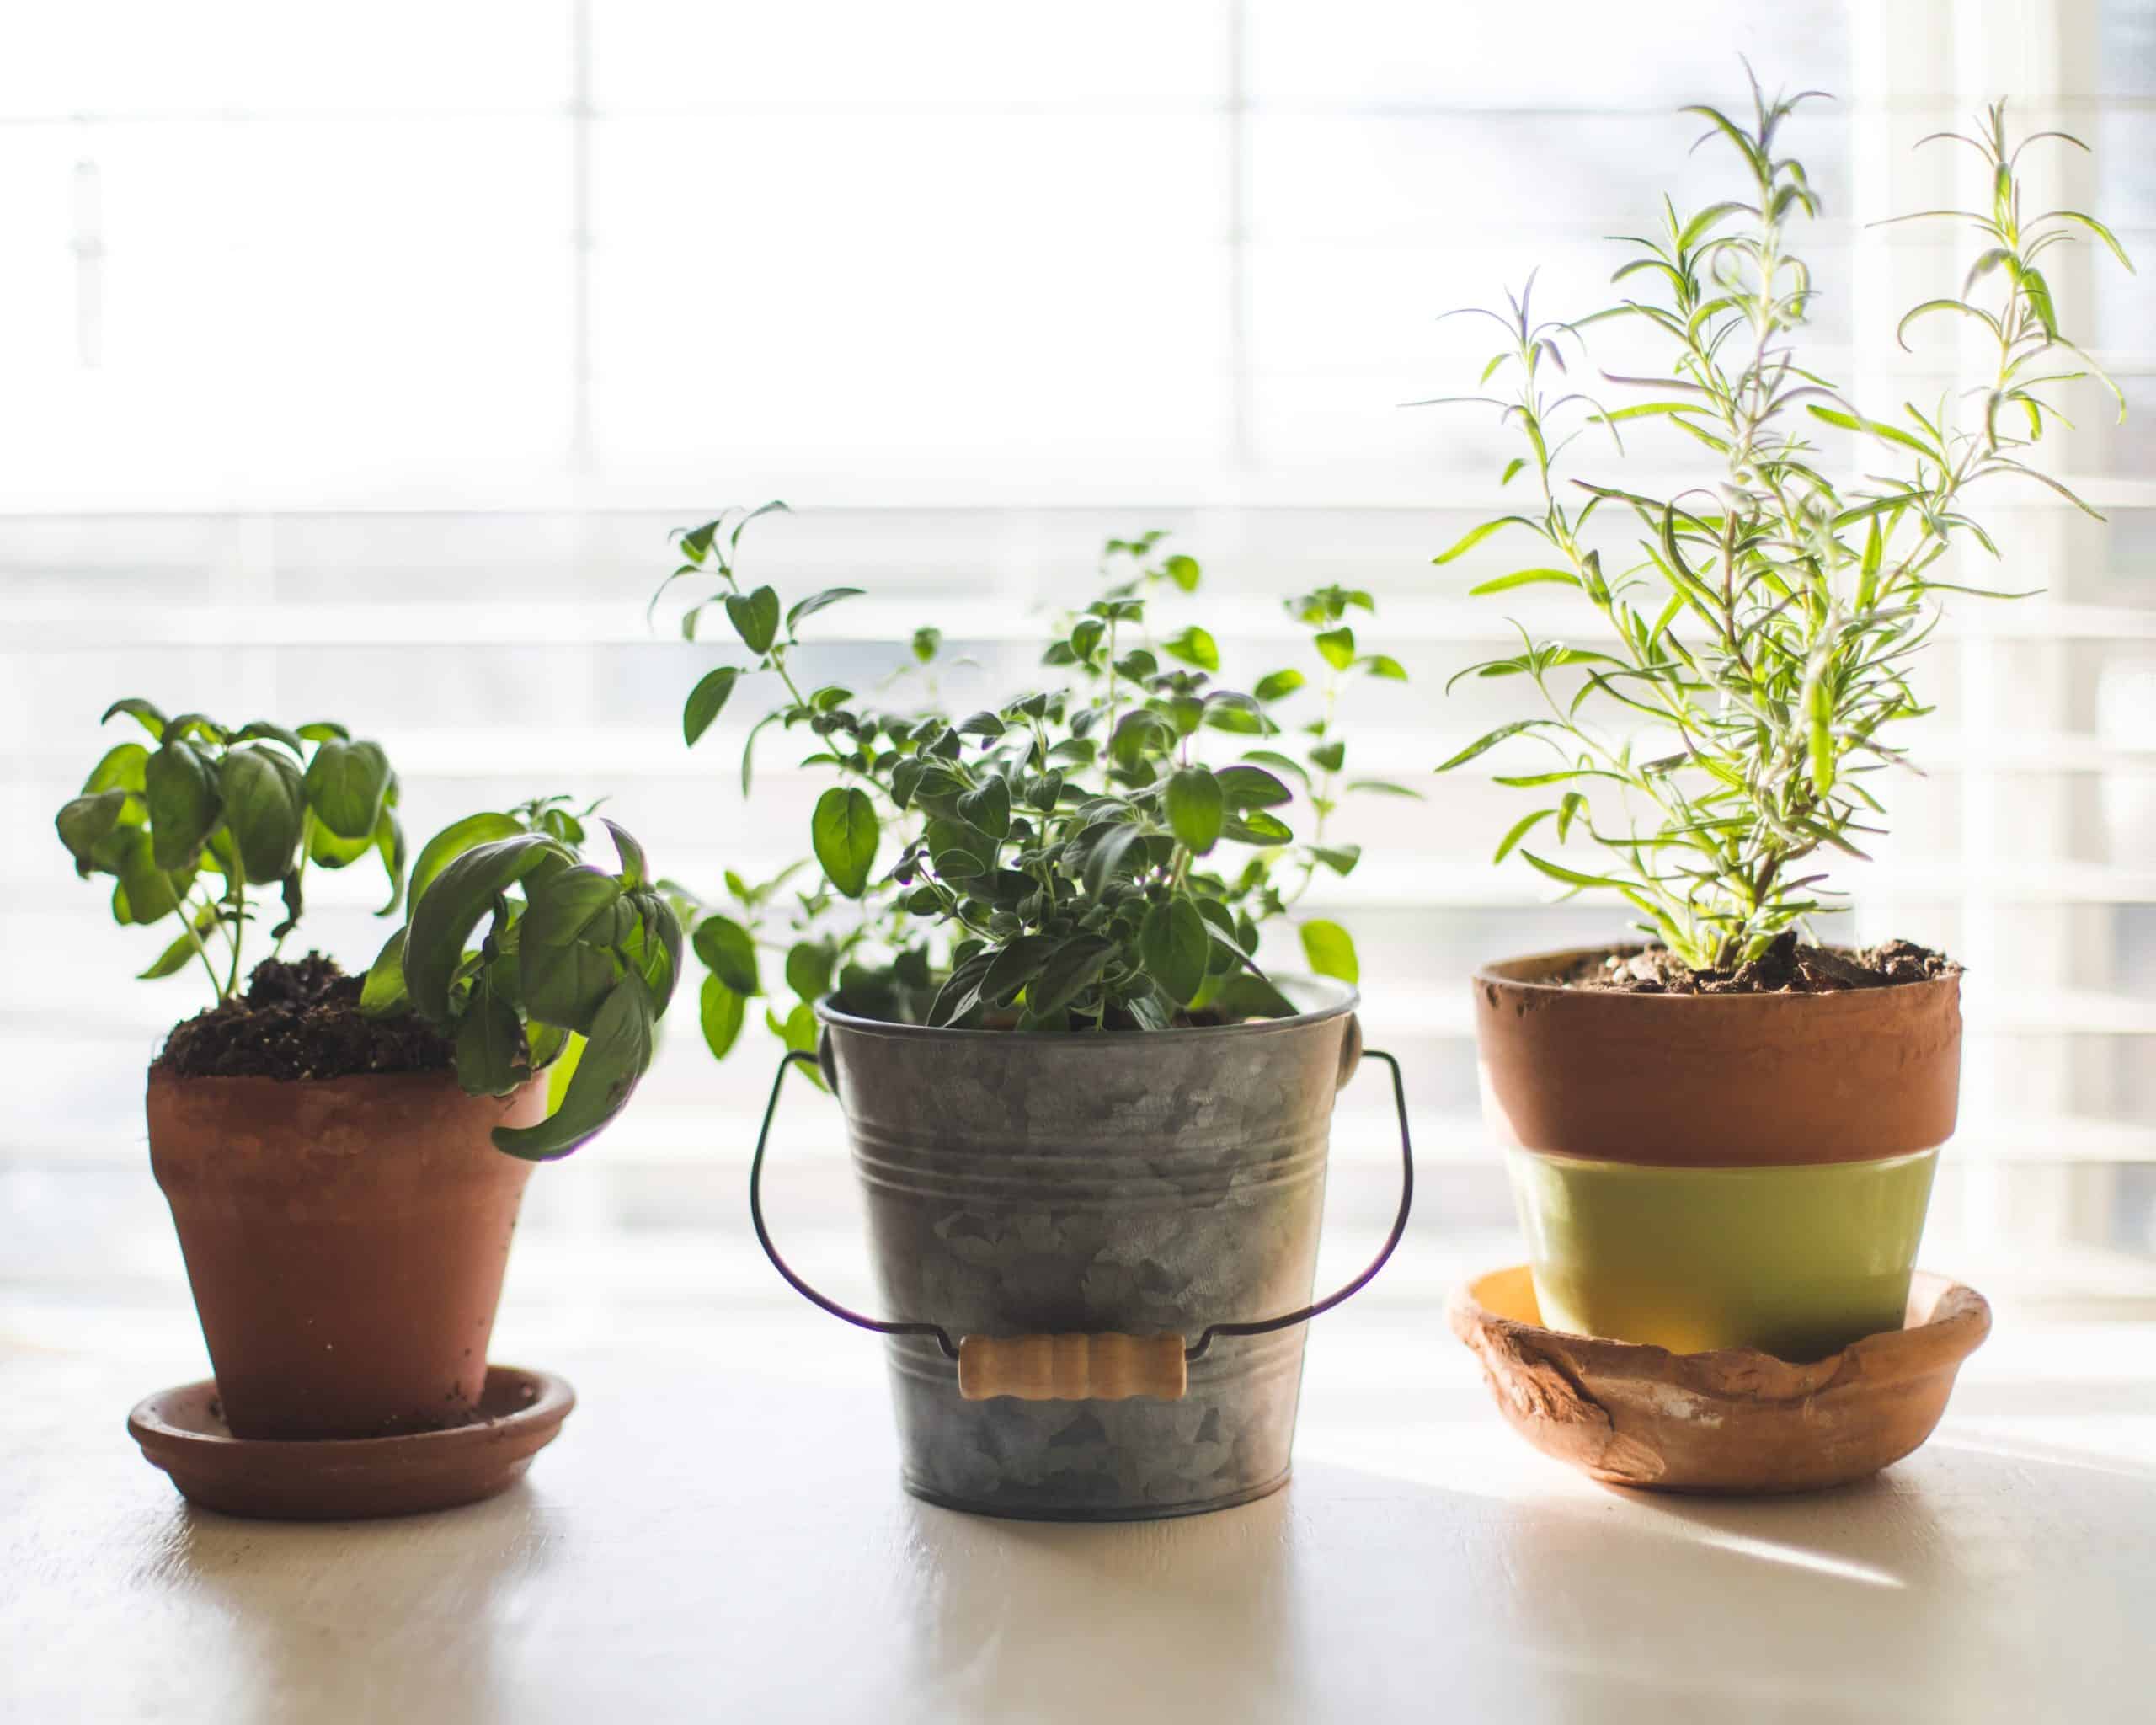 Gardening | Little things you can do to make yourself happy while home